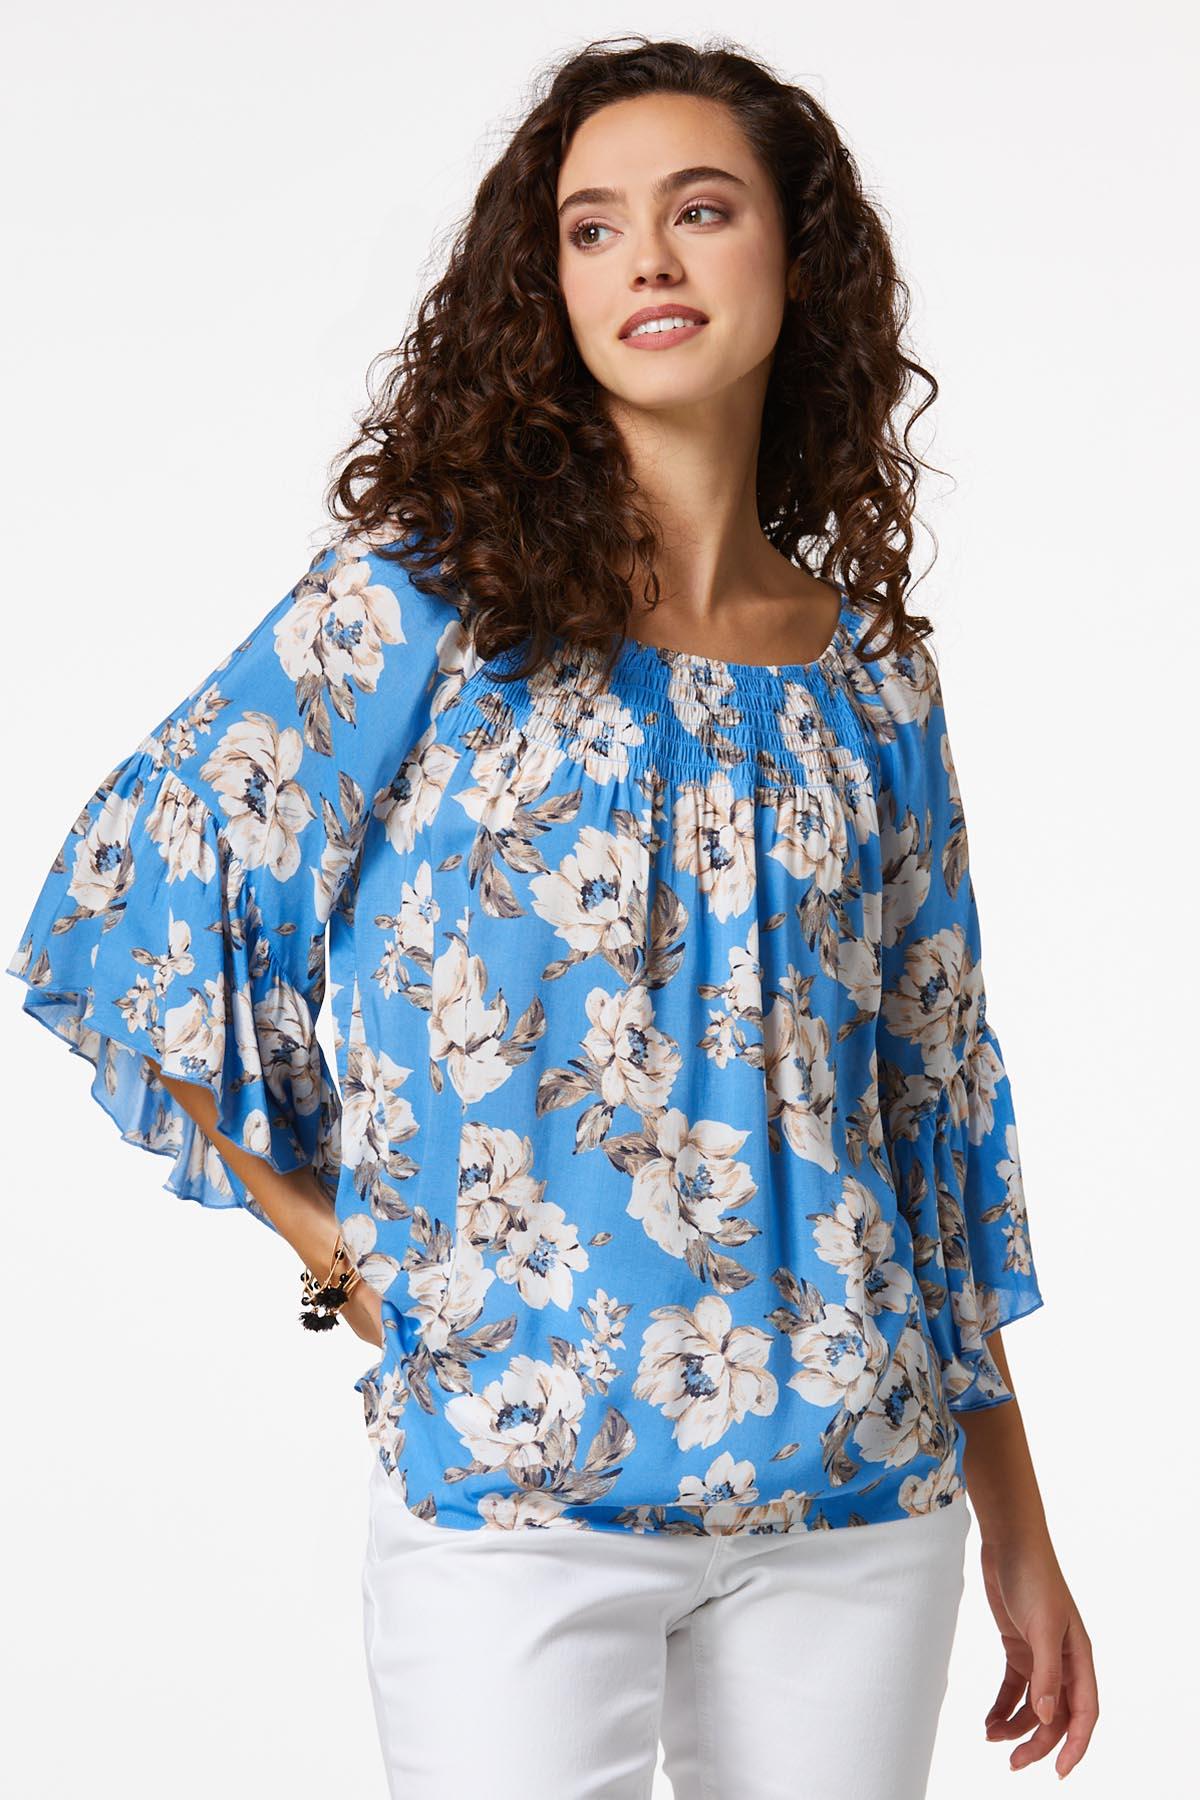 Cato Fashions | Cato Blue Floral Poet Top